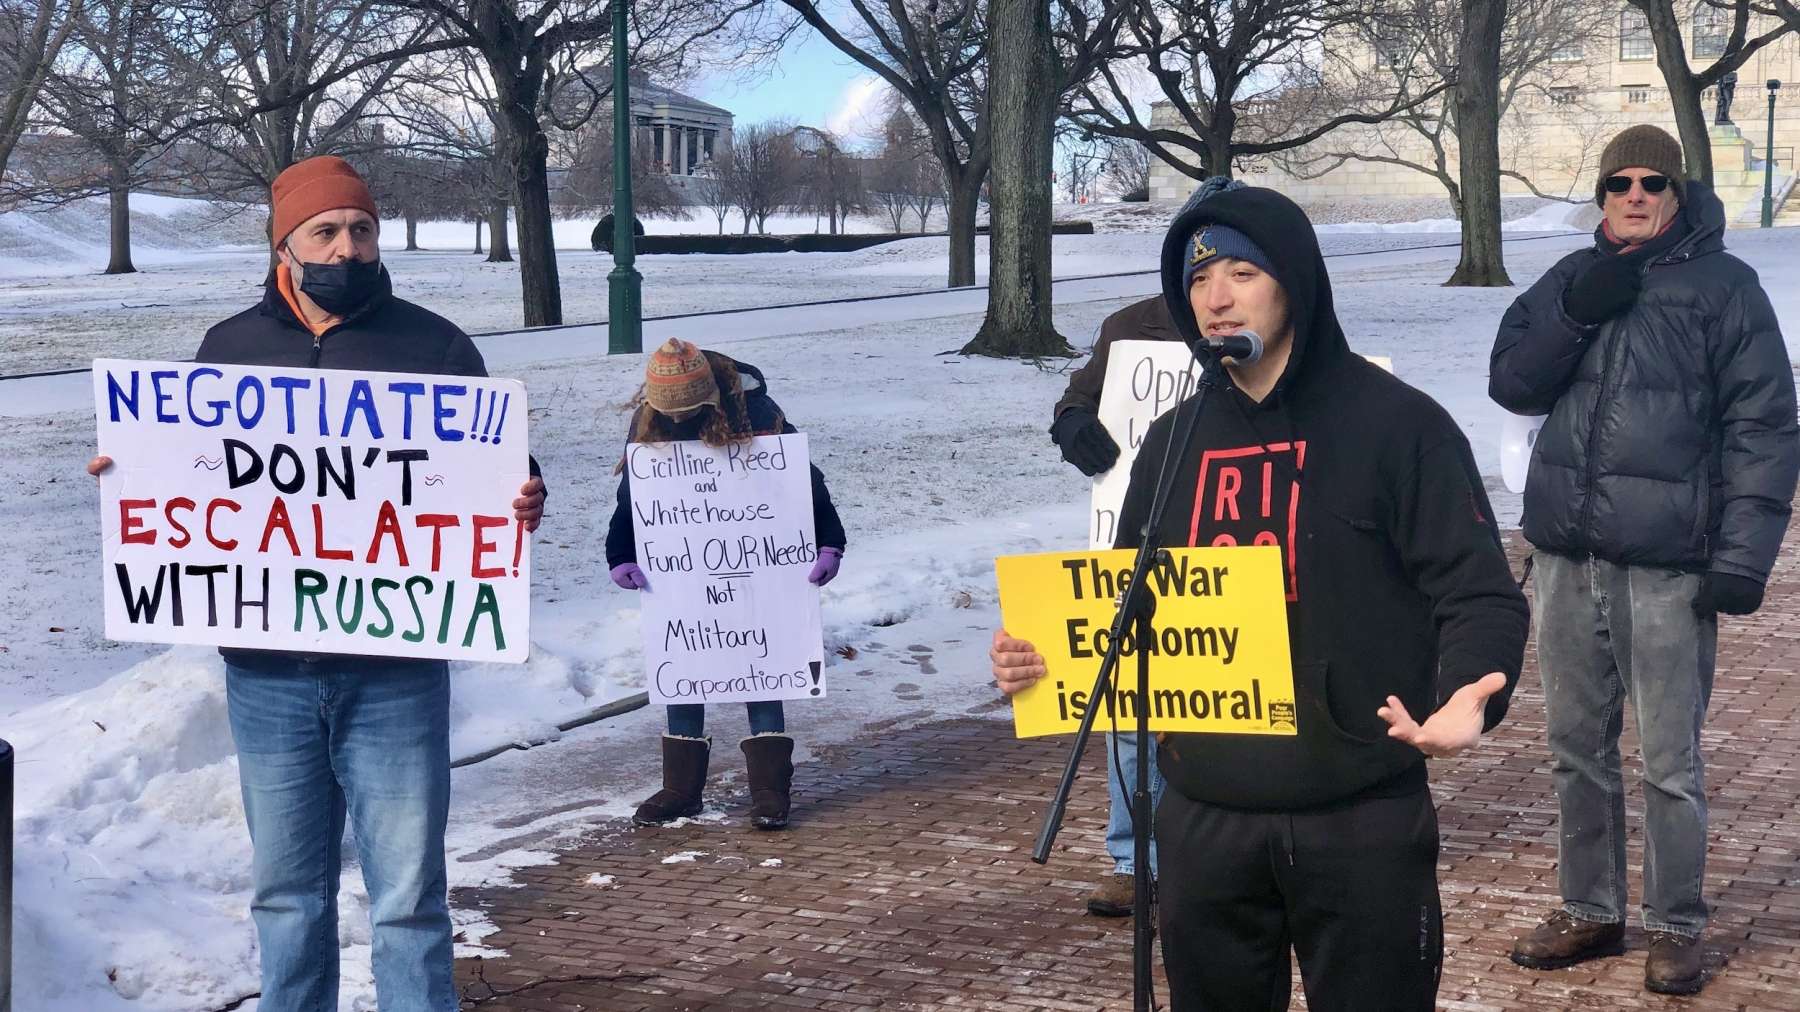 Rhode Island News: Providence joins antiwar protests around the world urging no US military action in Ukraine